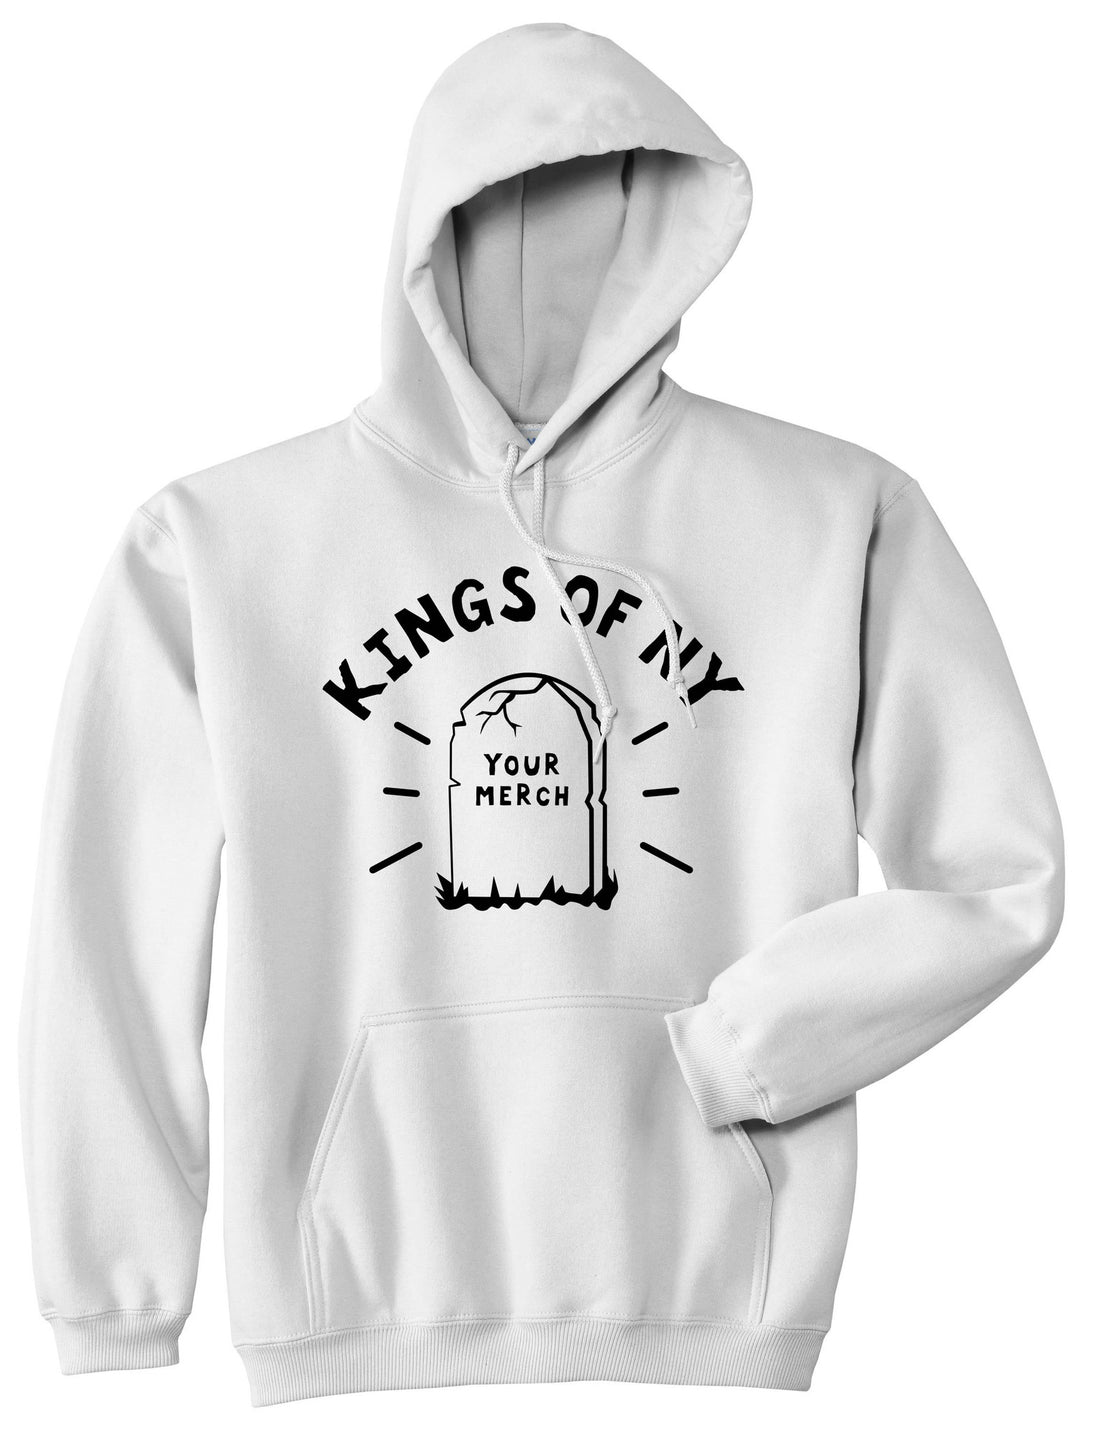 Your Merch Is Dead Pullover Hoodie